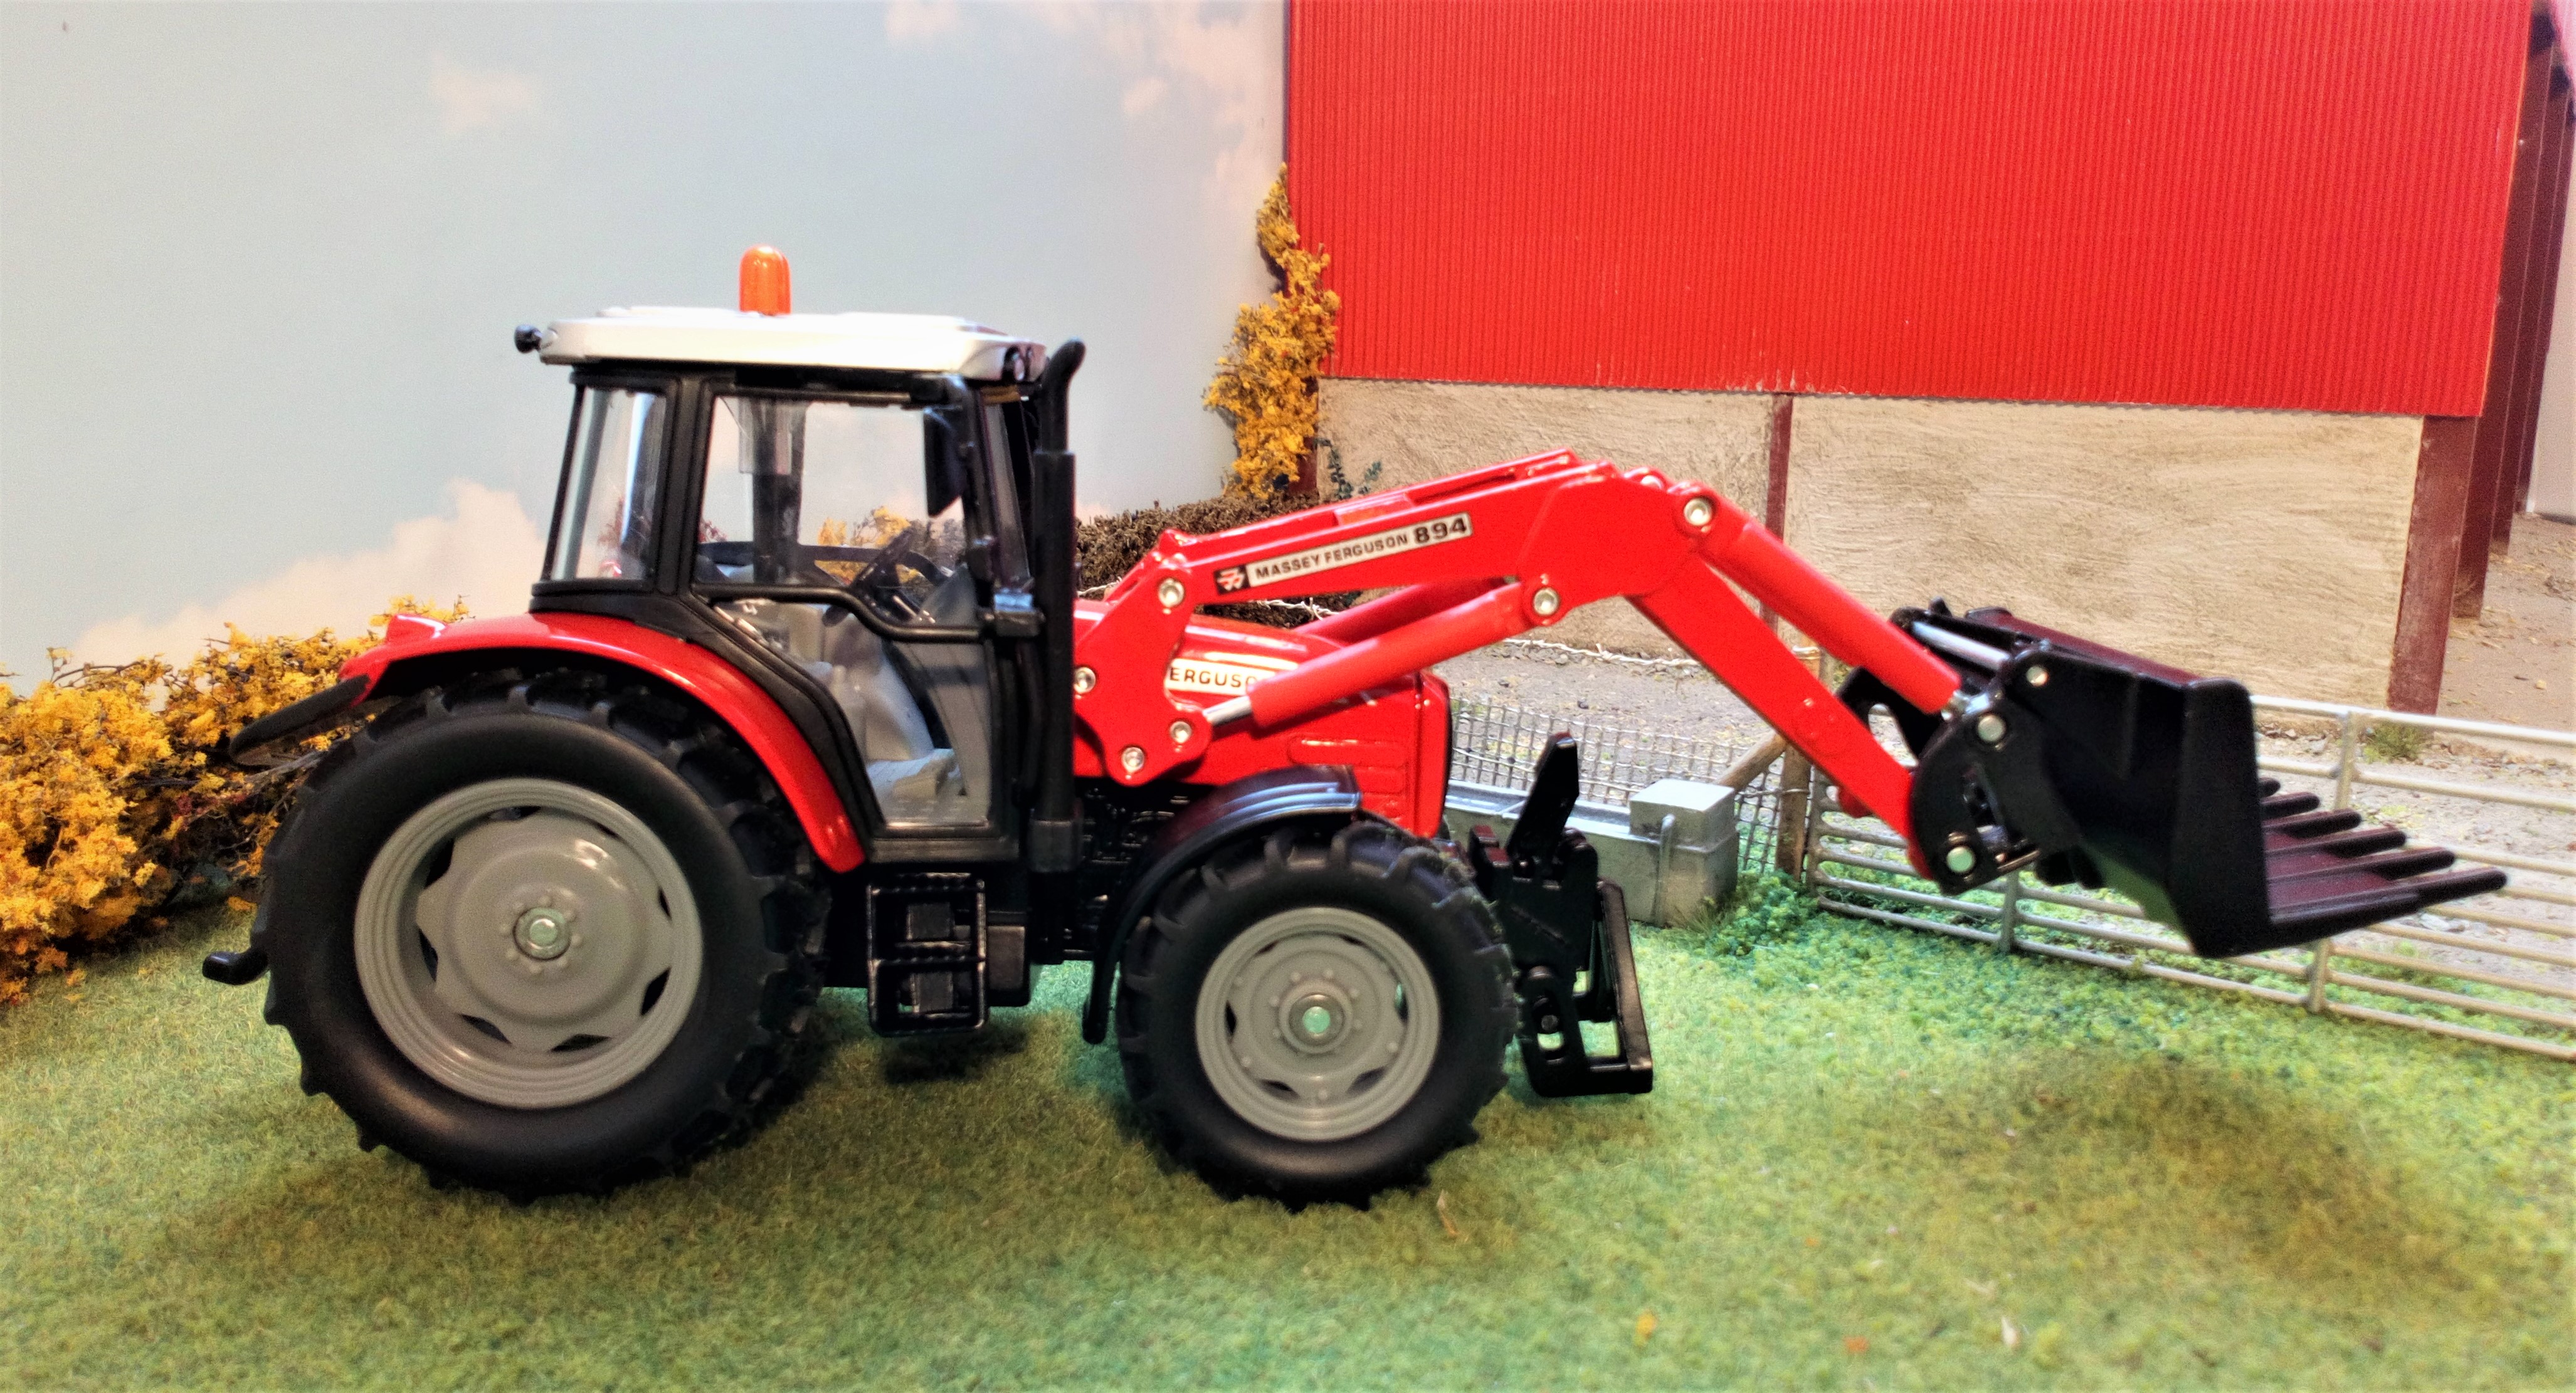 Massey Ferguson tractor with front loader aprox Scale 1:76 H0 Siku 1484 